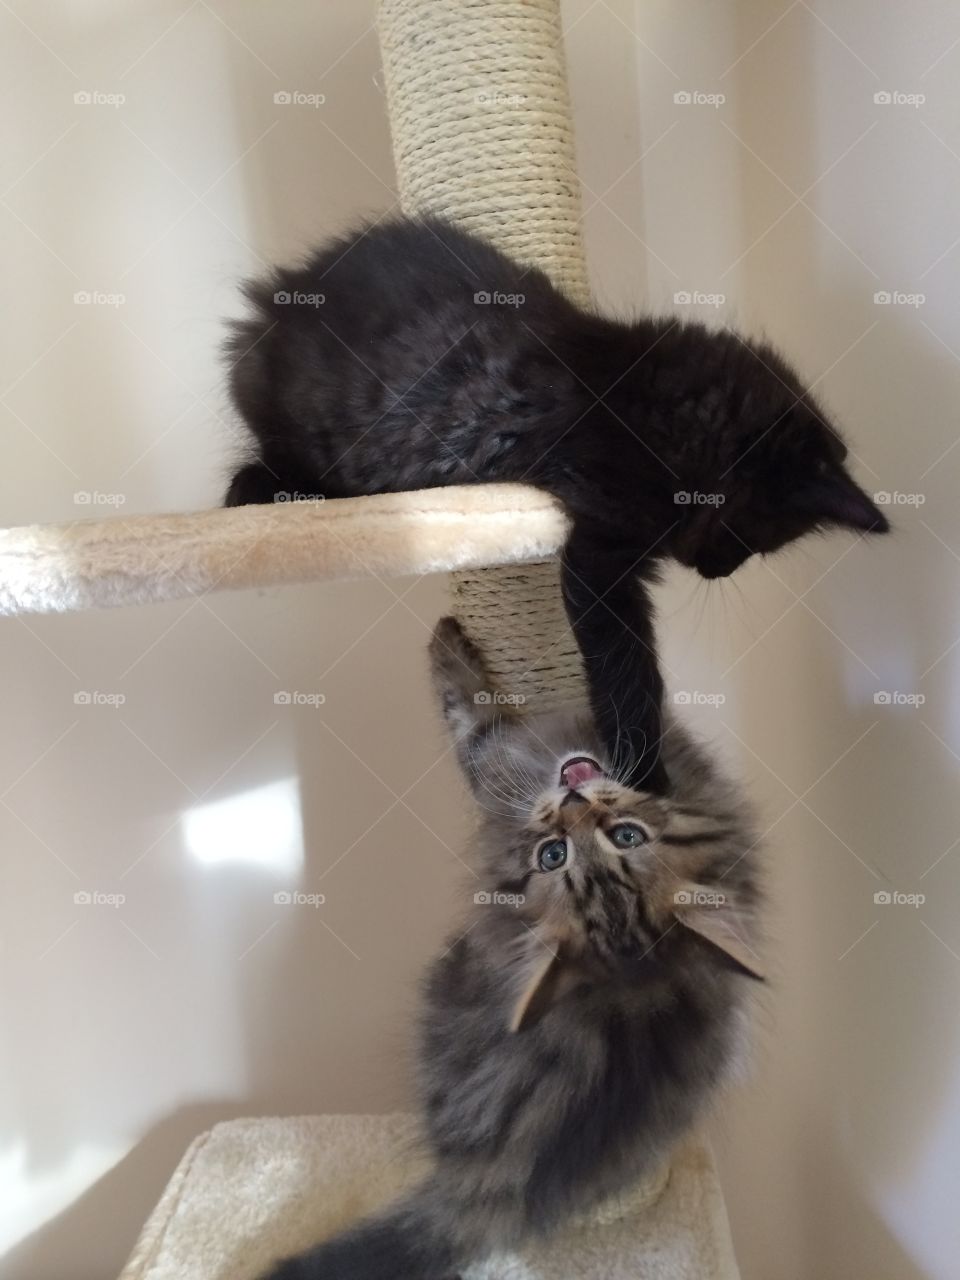 playtime Maine coon kittens.